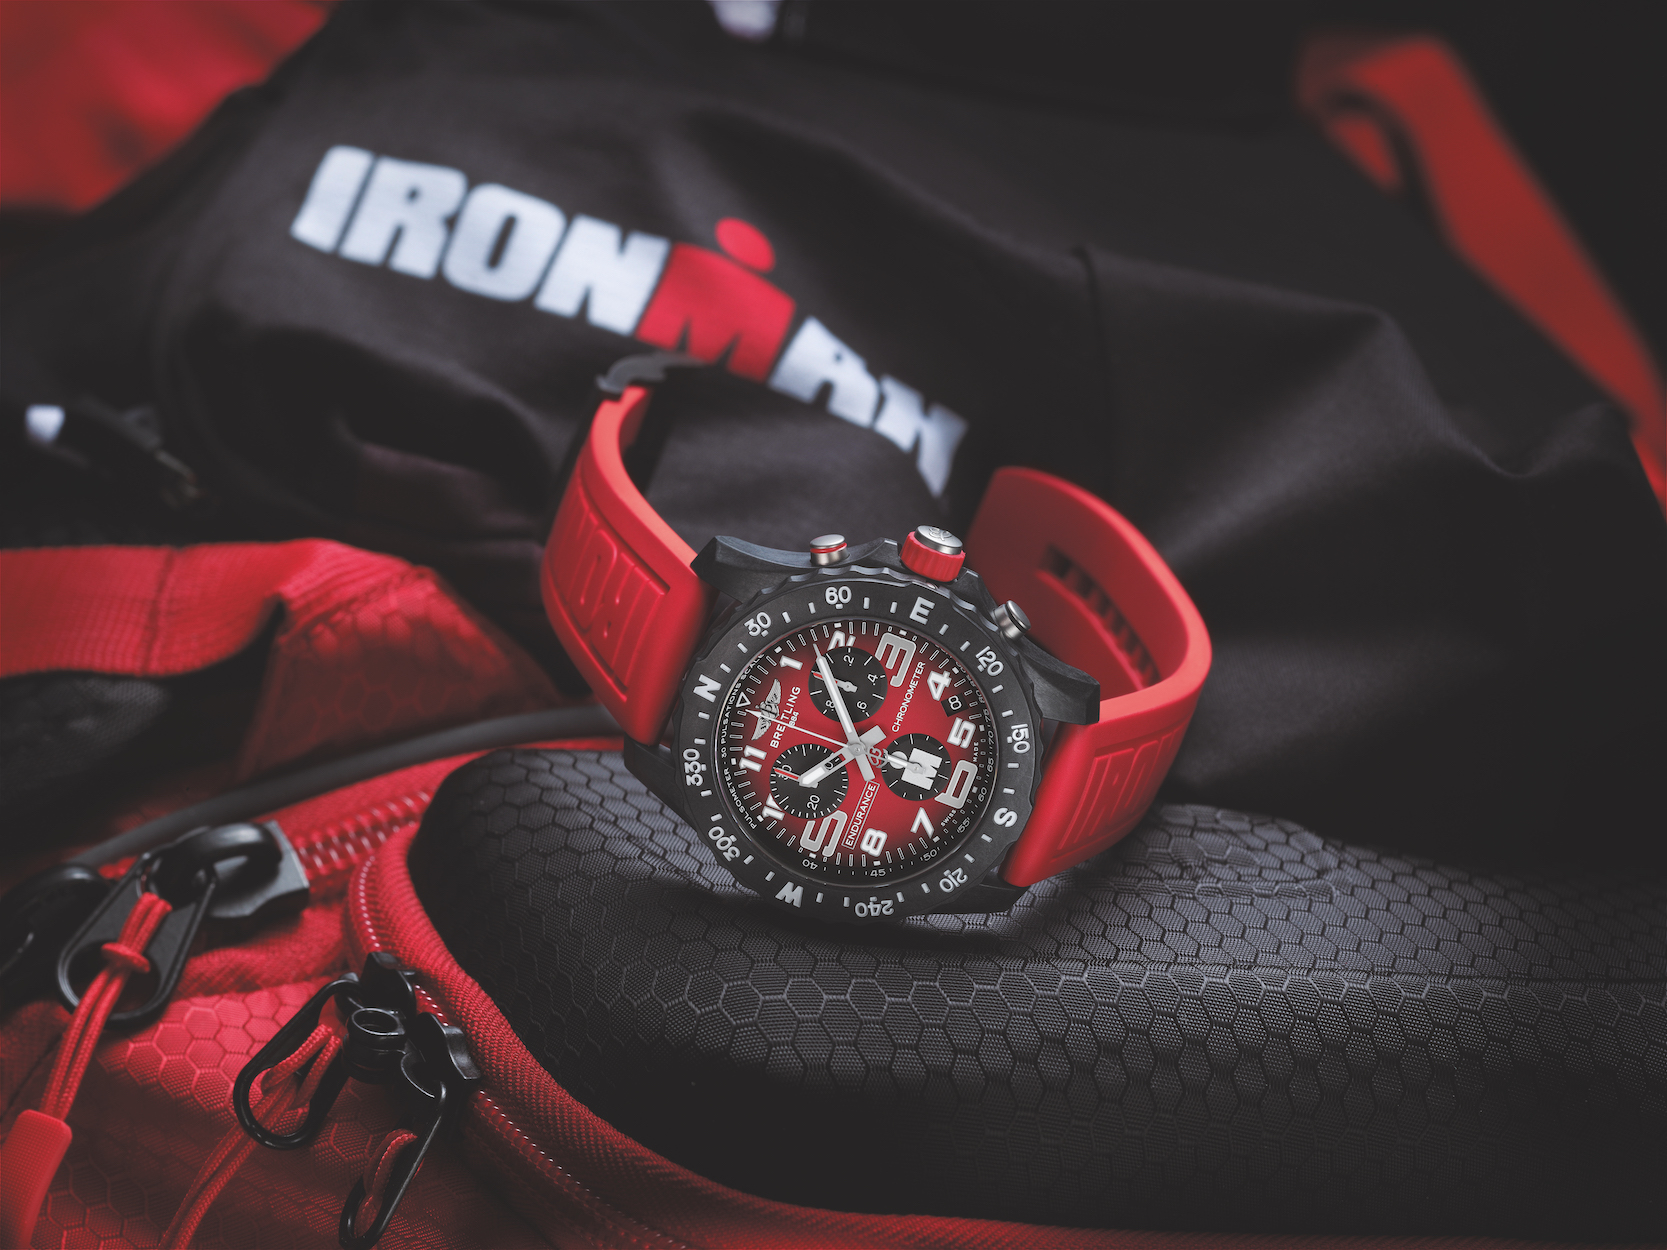 Breitling Endurance Pro IRONMAN watch honors the new partnership with Breitling as the Official Luxury Watch of Ironman events. 